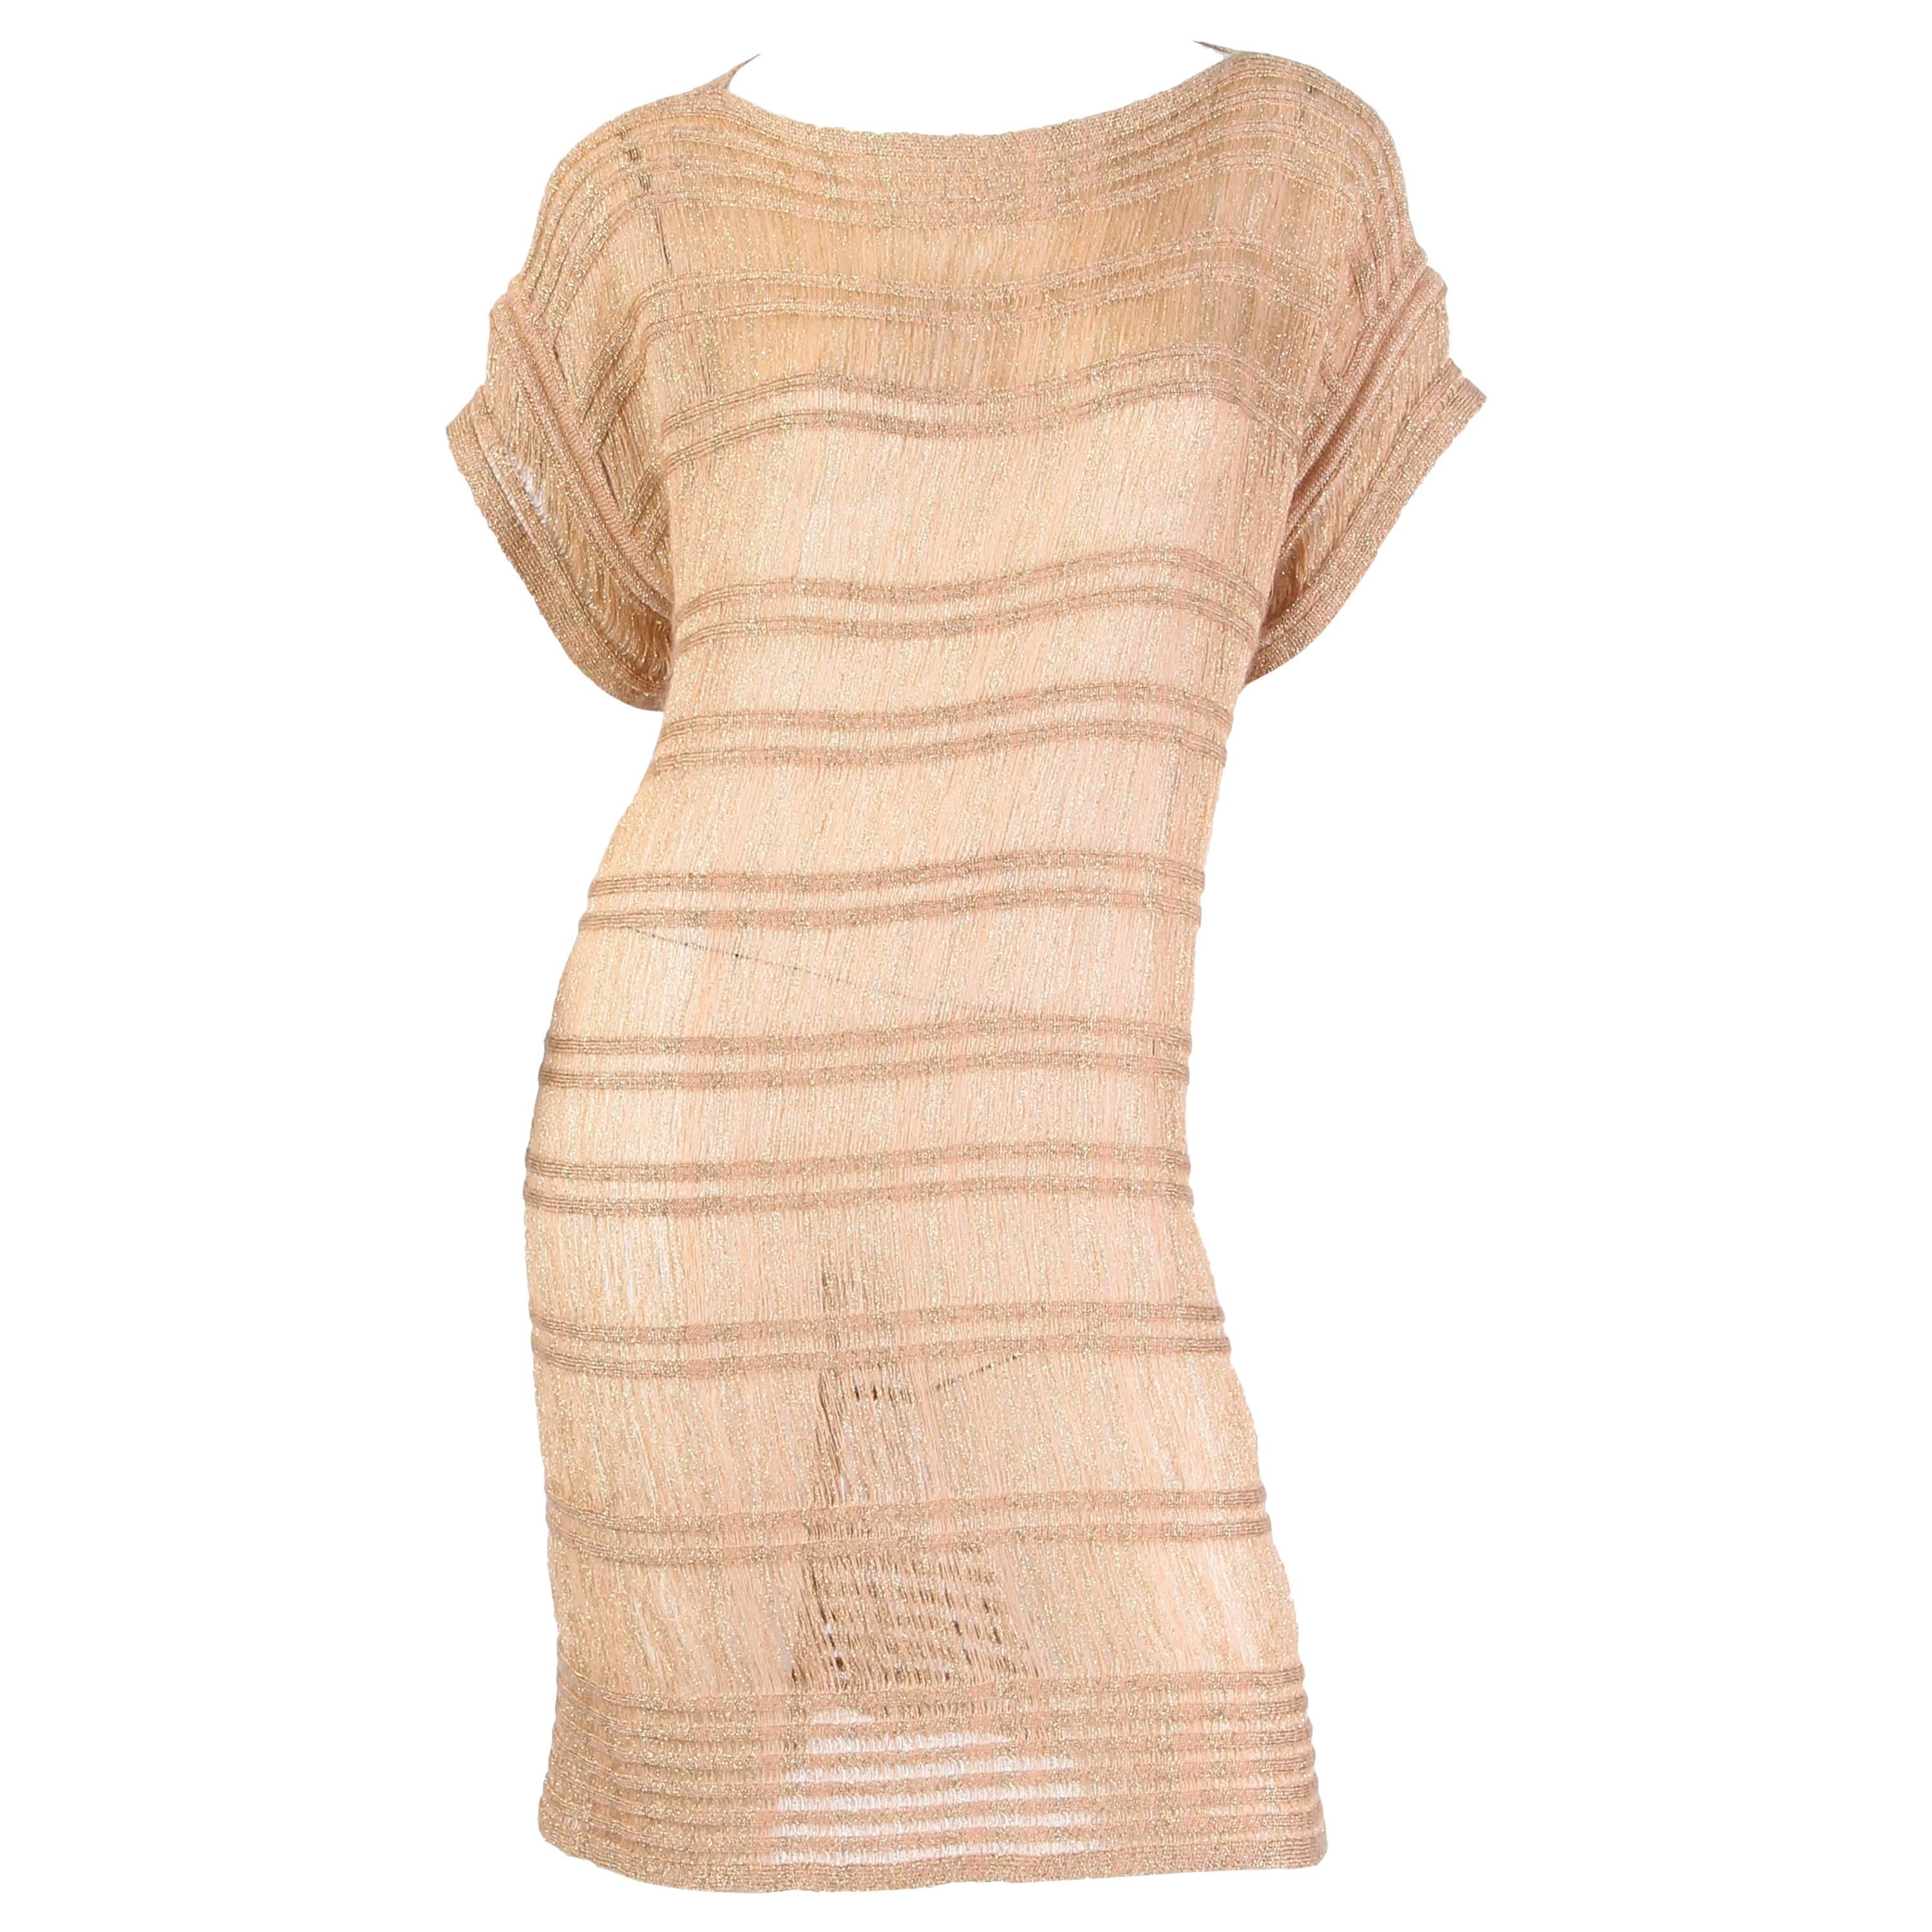 2000S MISSONI Camel & Gold Wool Blend Knit Tunic Dress With Lurex